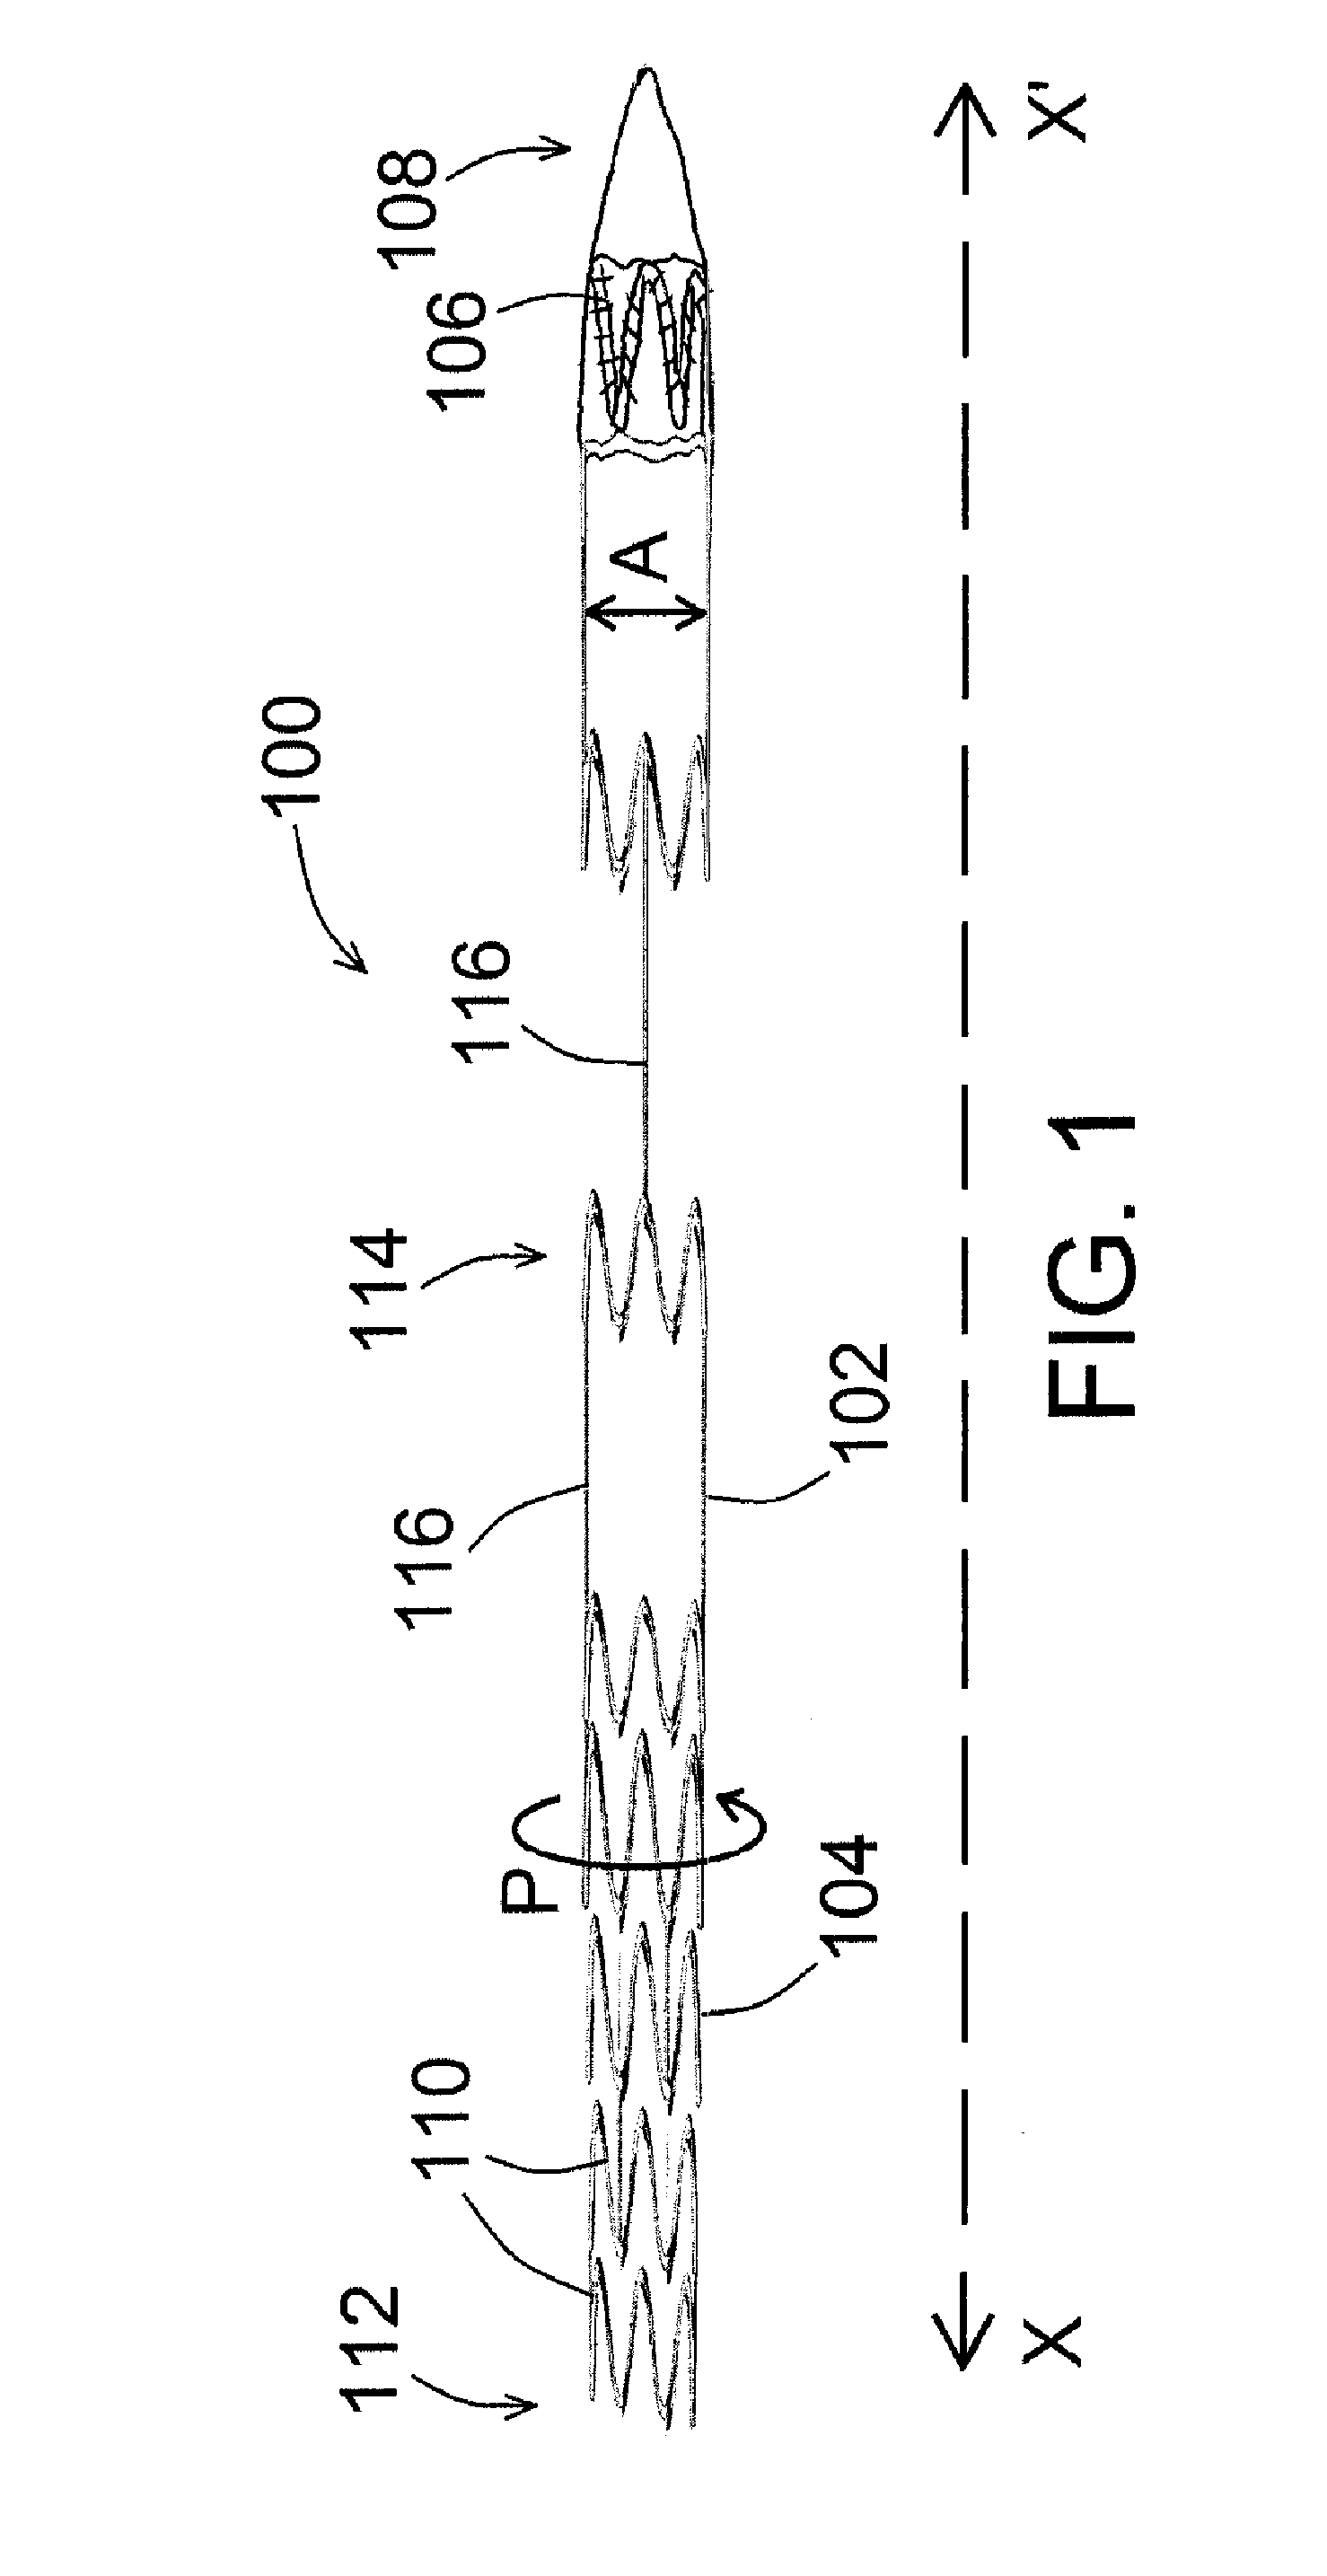 Devices, systems, and methods to precondition, arterialize and/or occlude a mammalian luminal organ